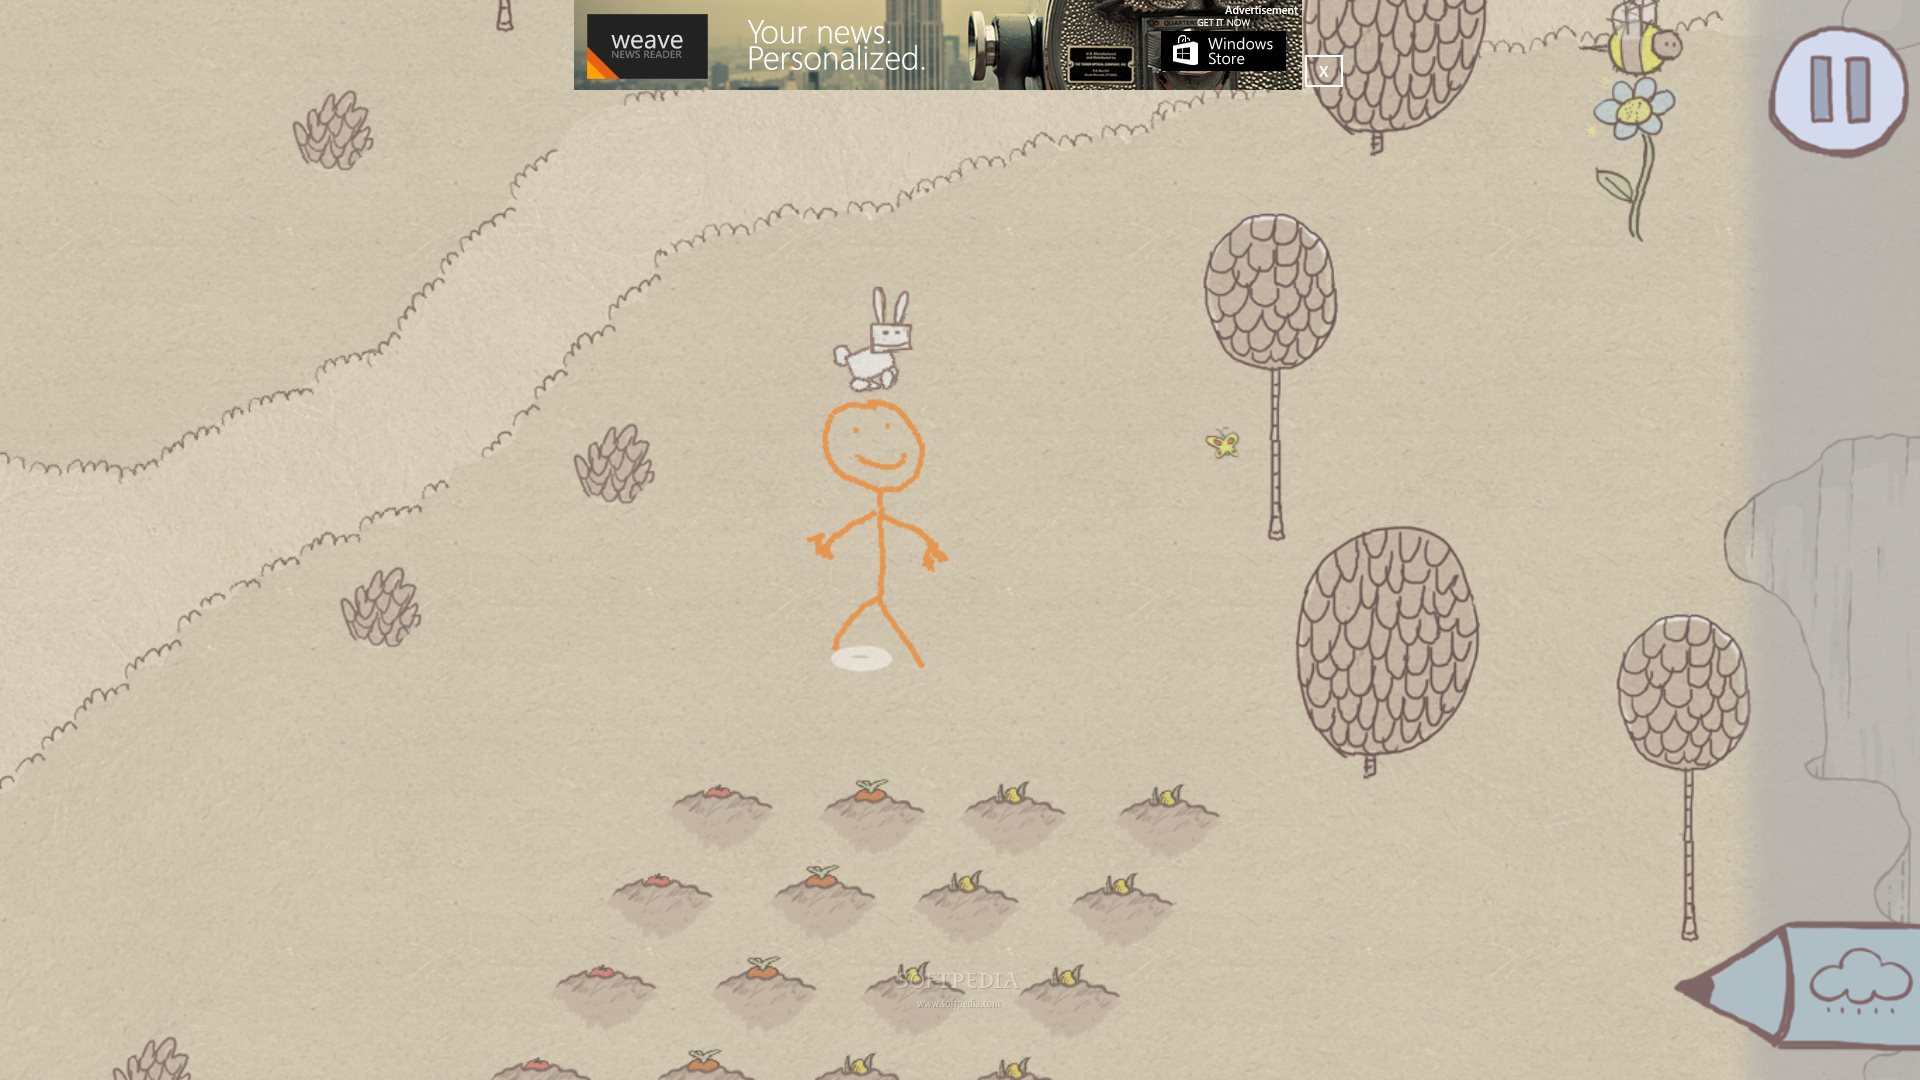 Draw a Stickman: EPIC Free for ios download free